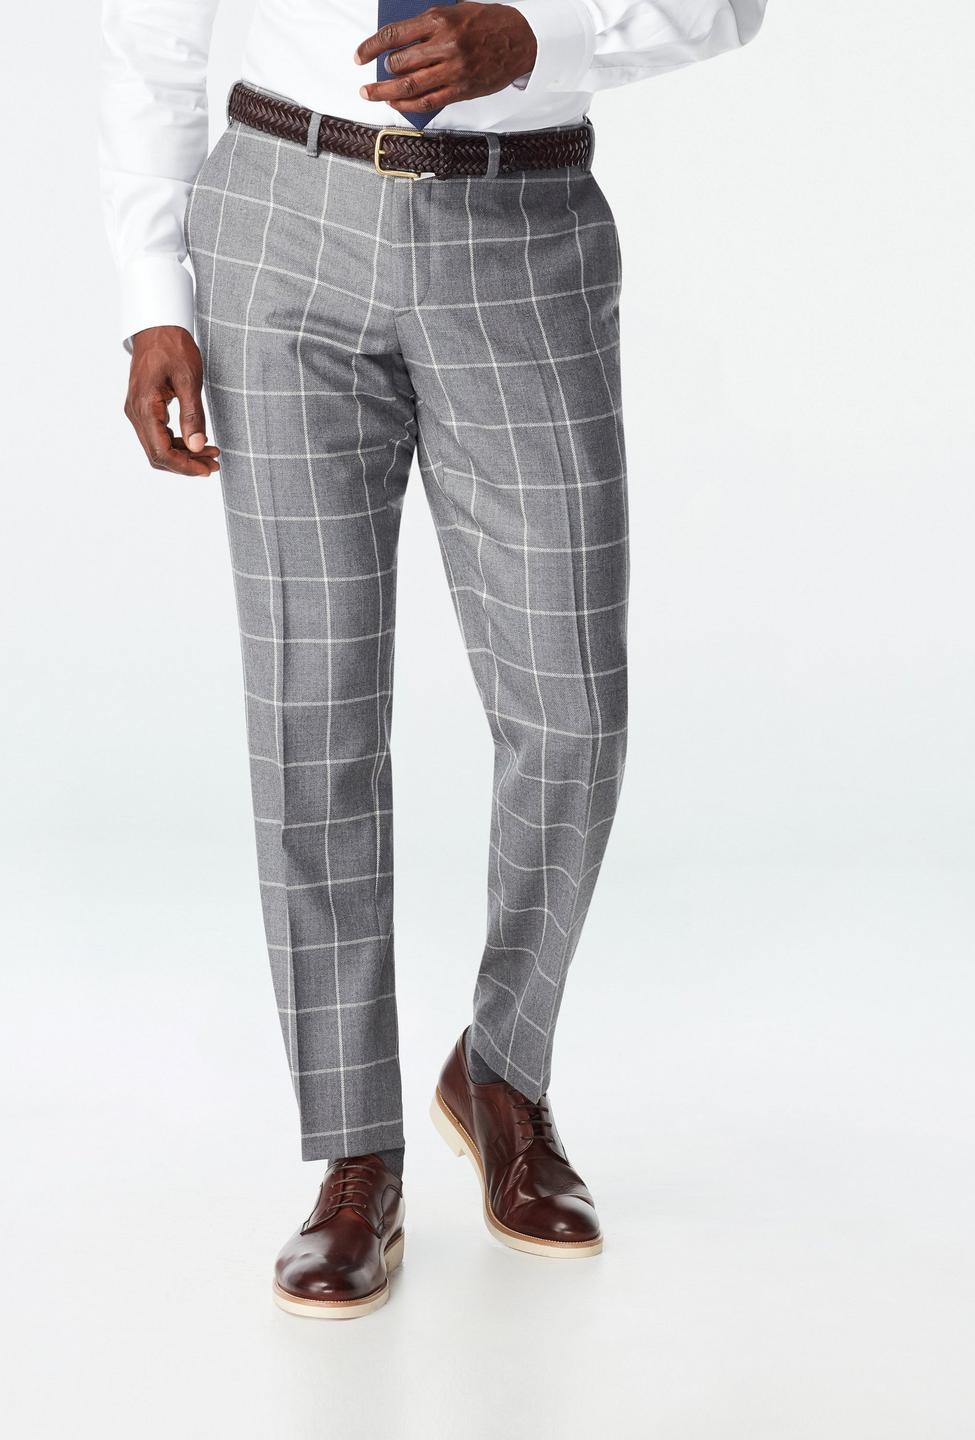 Gray pants - Durham Checked Design from Seasonal Indochino Collection